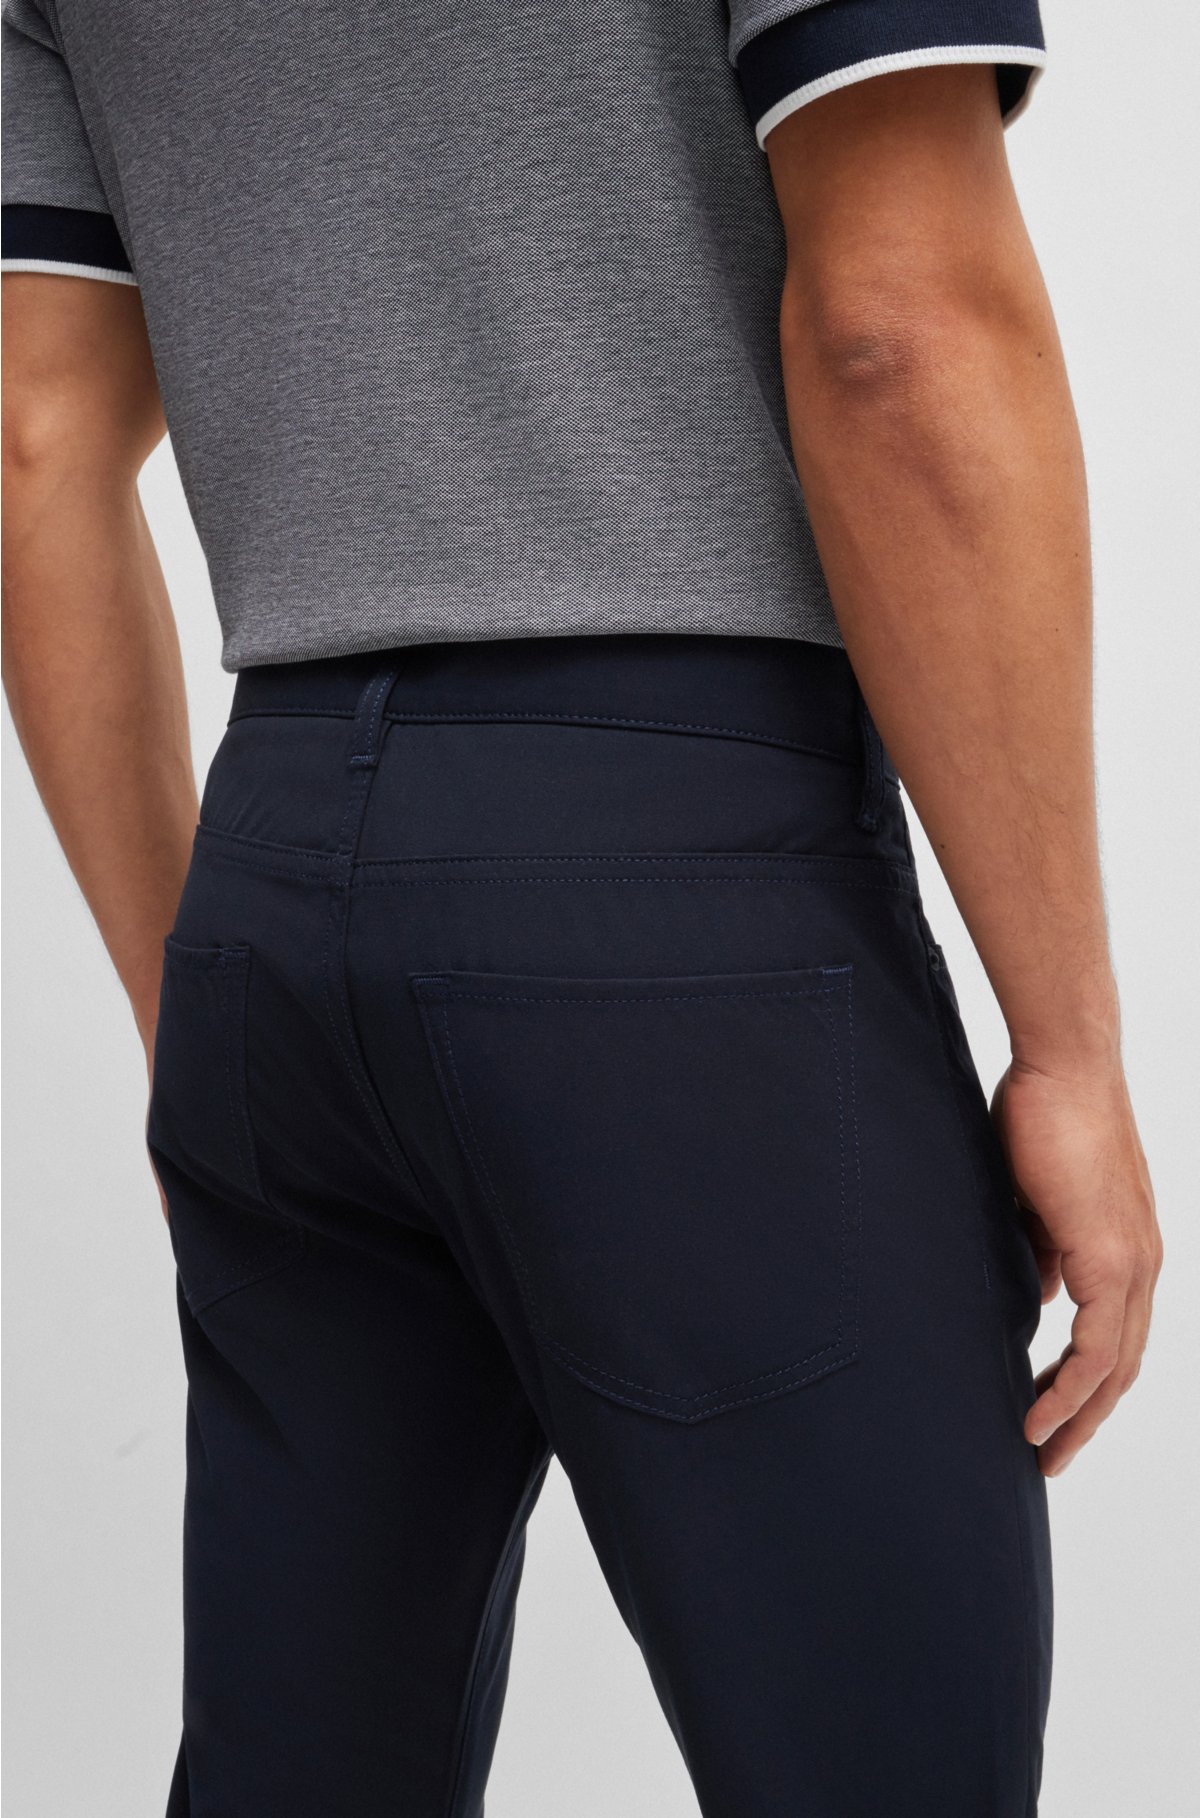 Slim-fit jeans in woven stretch material, Dark Blue